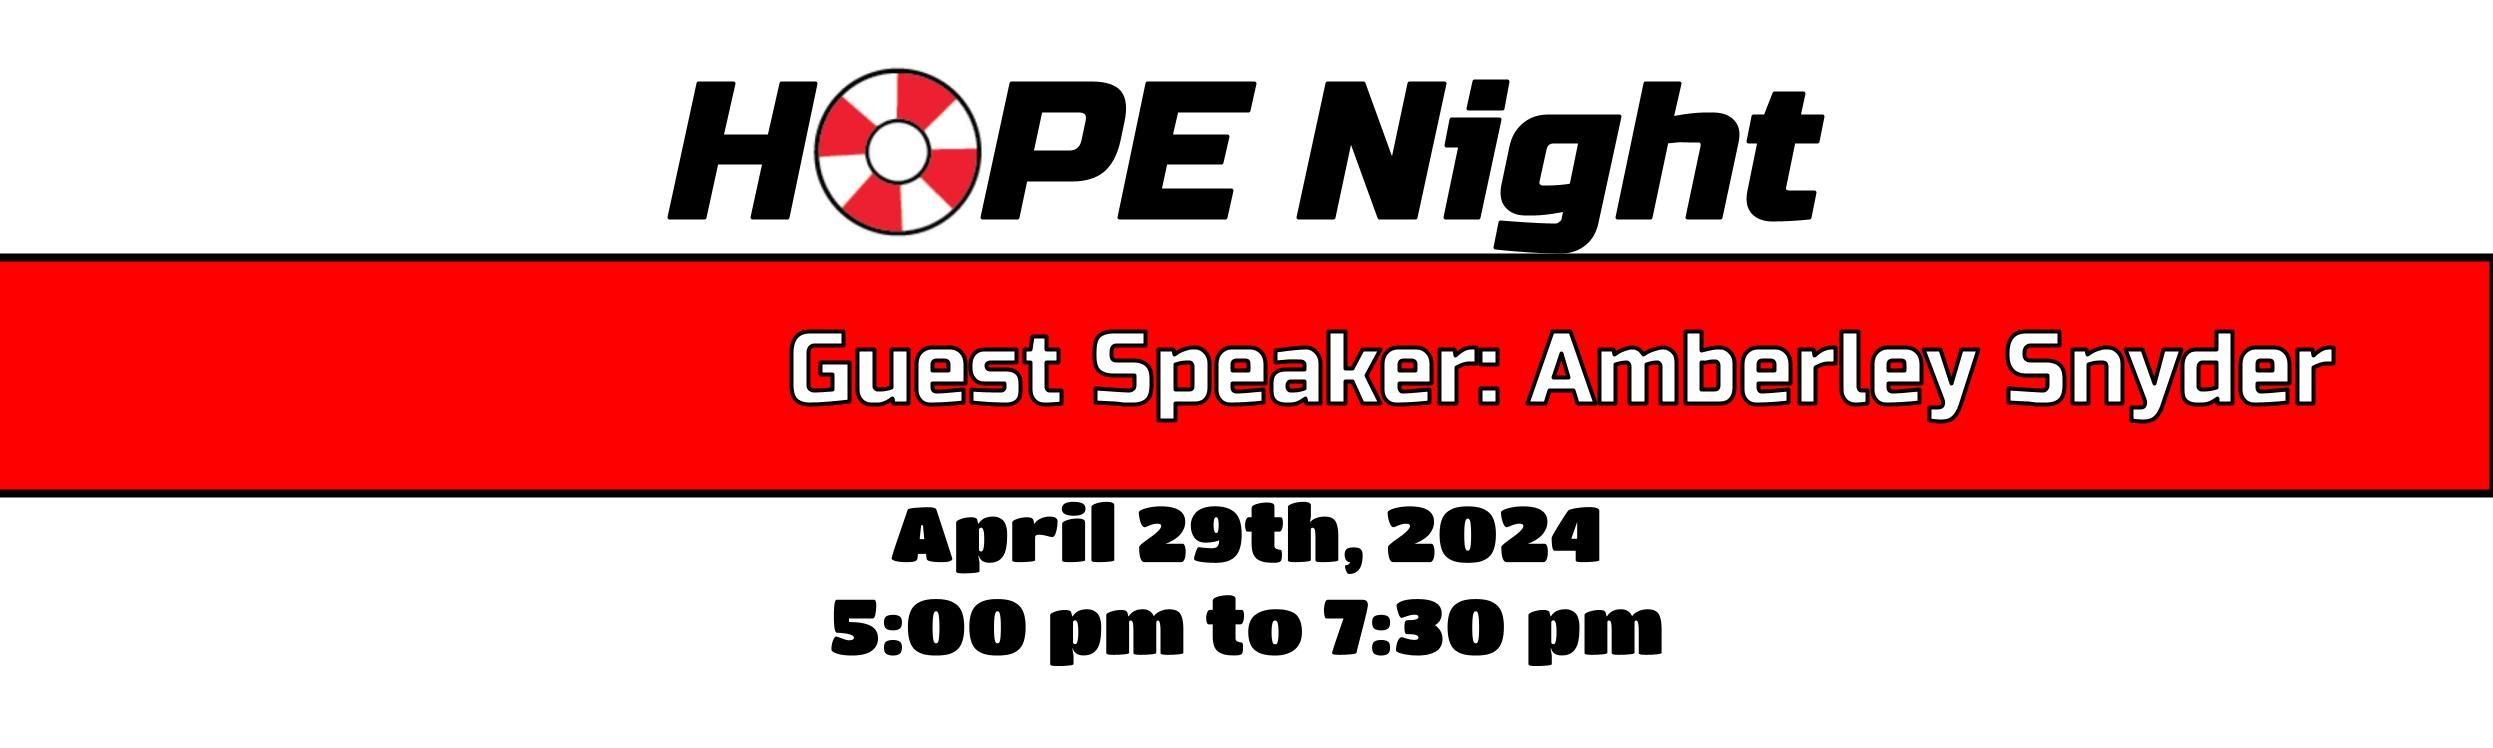 Hope Night. Guest Speaker: Amberley Snyder. April 29th from 5 pm to 7:30 pm at Fremont High. Click for more information.